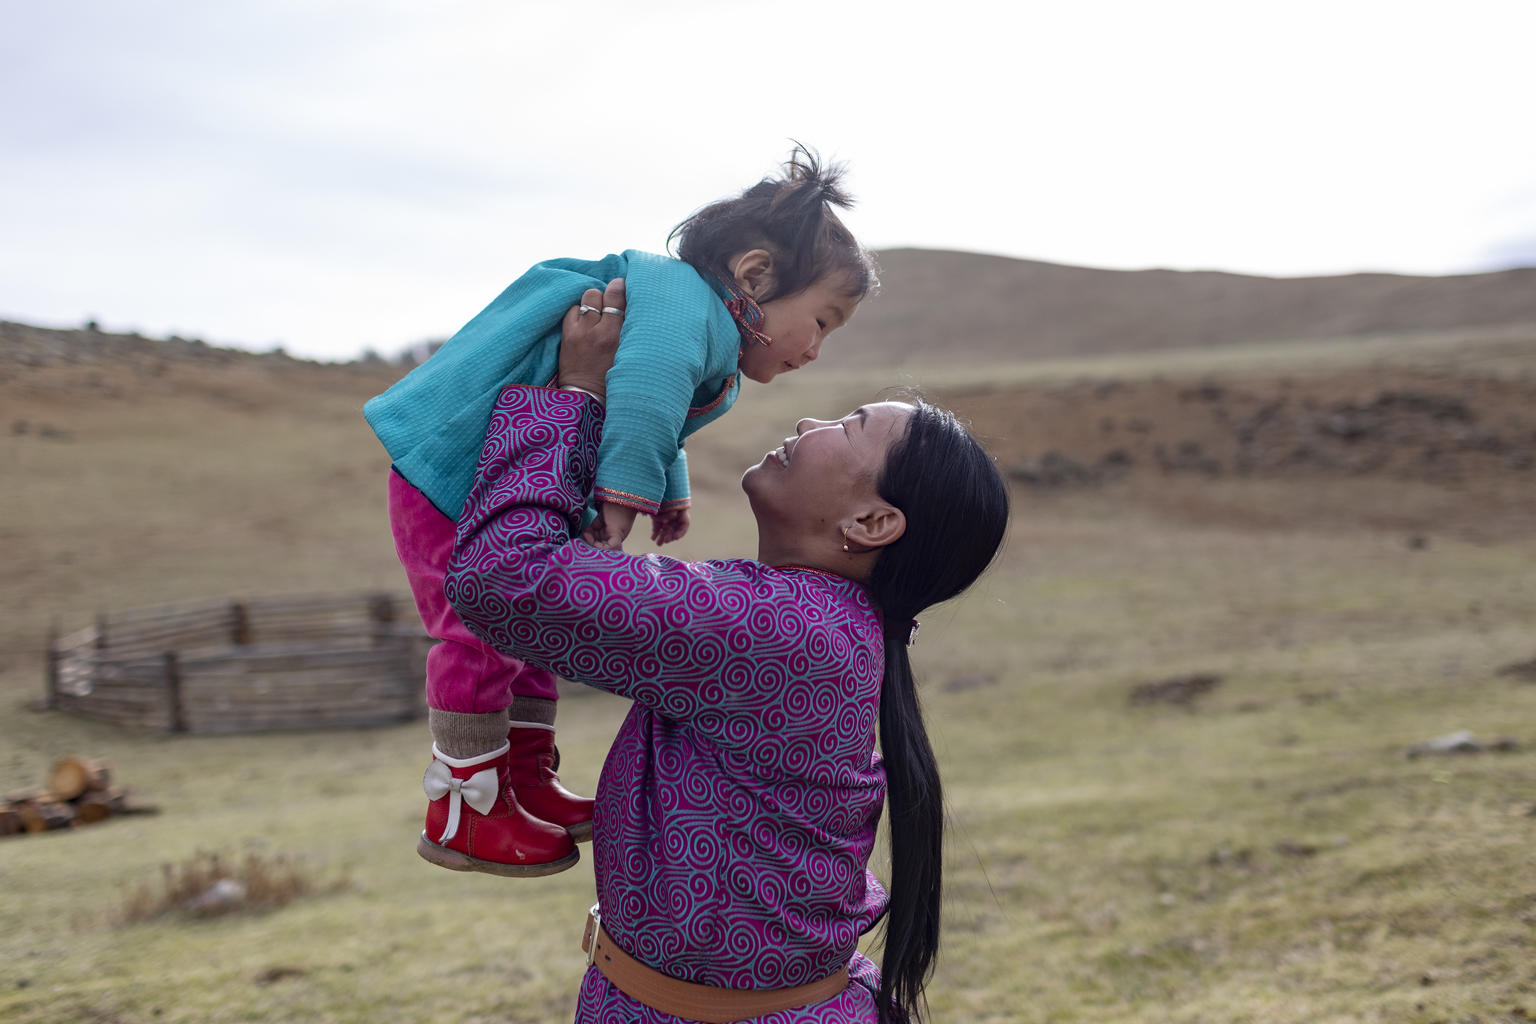 A mother and child in Mongolia.